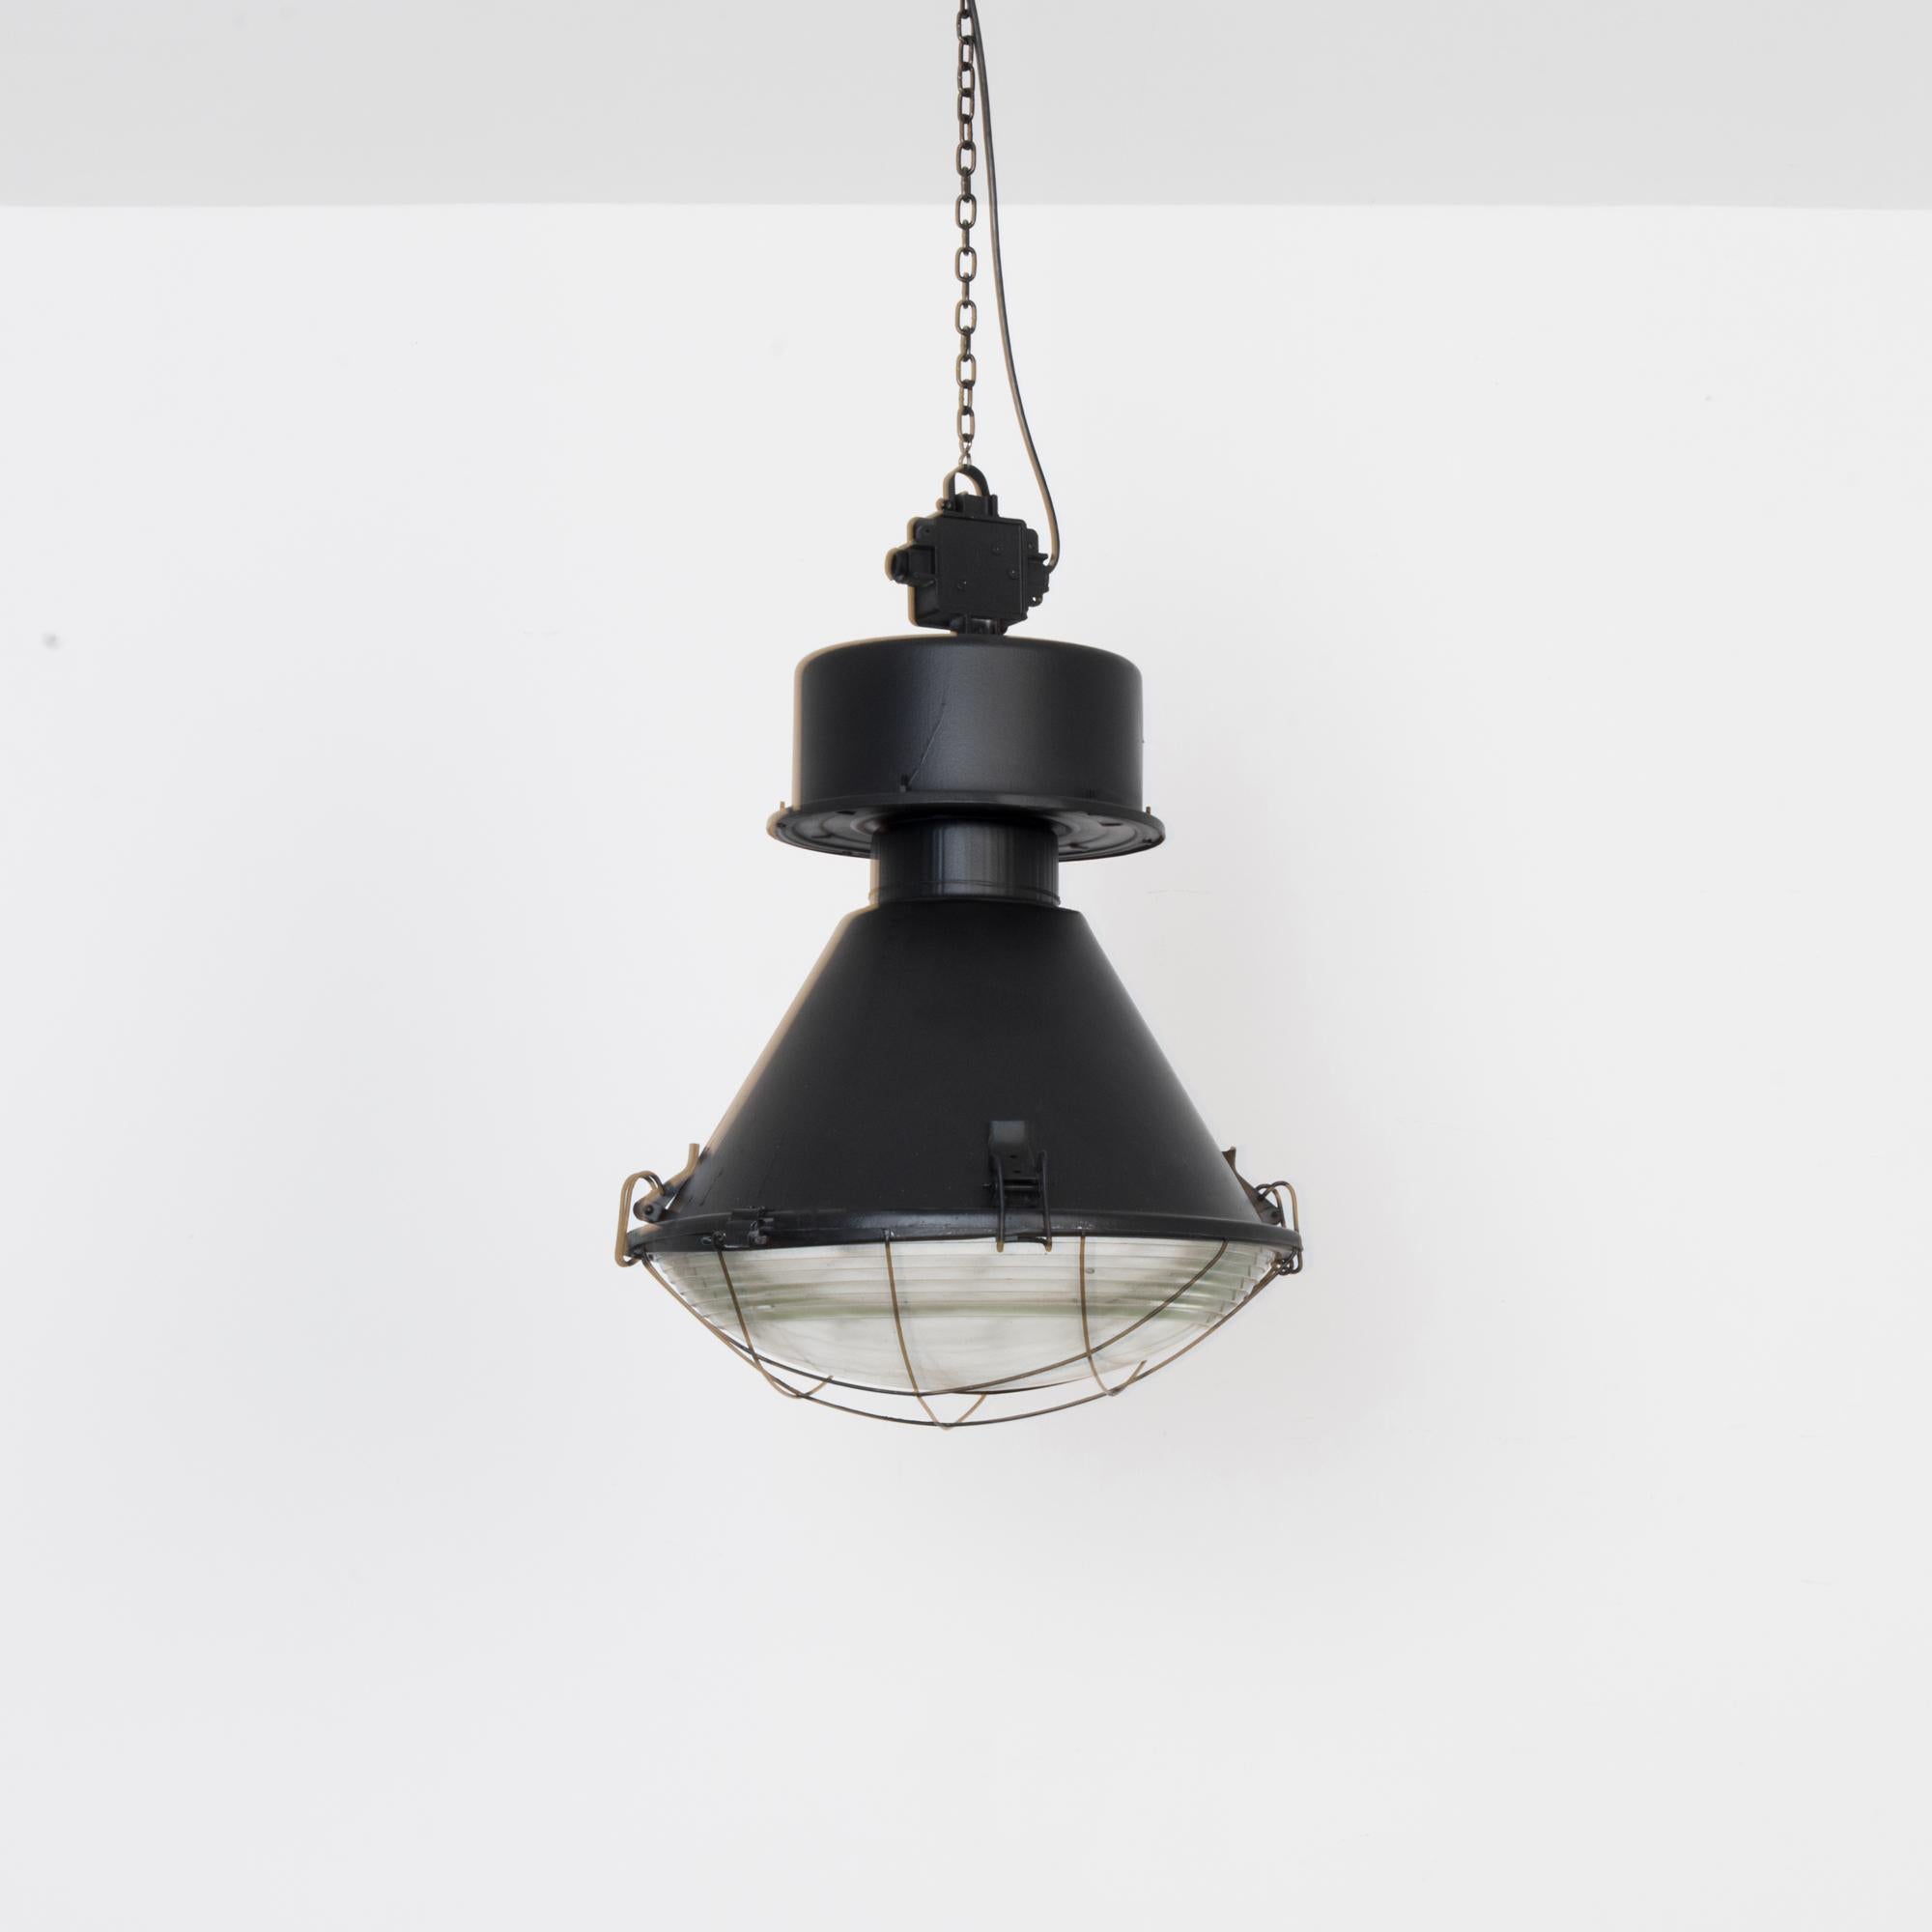 Original finishes and hardware, re-electrified and fitted for E26 socket. Enclosed in thick textured glass, this large scale industrial pendant blends clean lines with bold geometric forms. A sturdy and stylish industrial touch in your space.